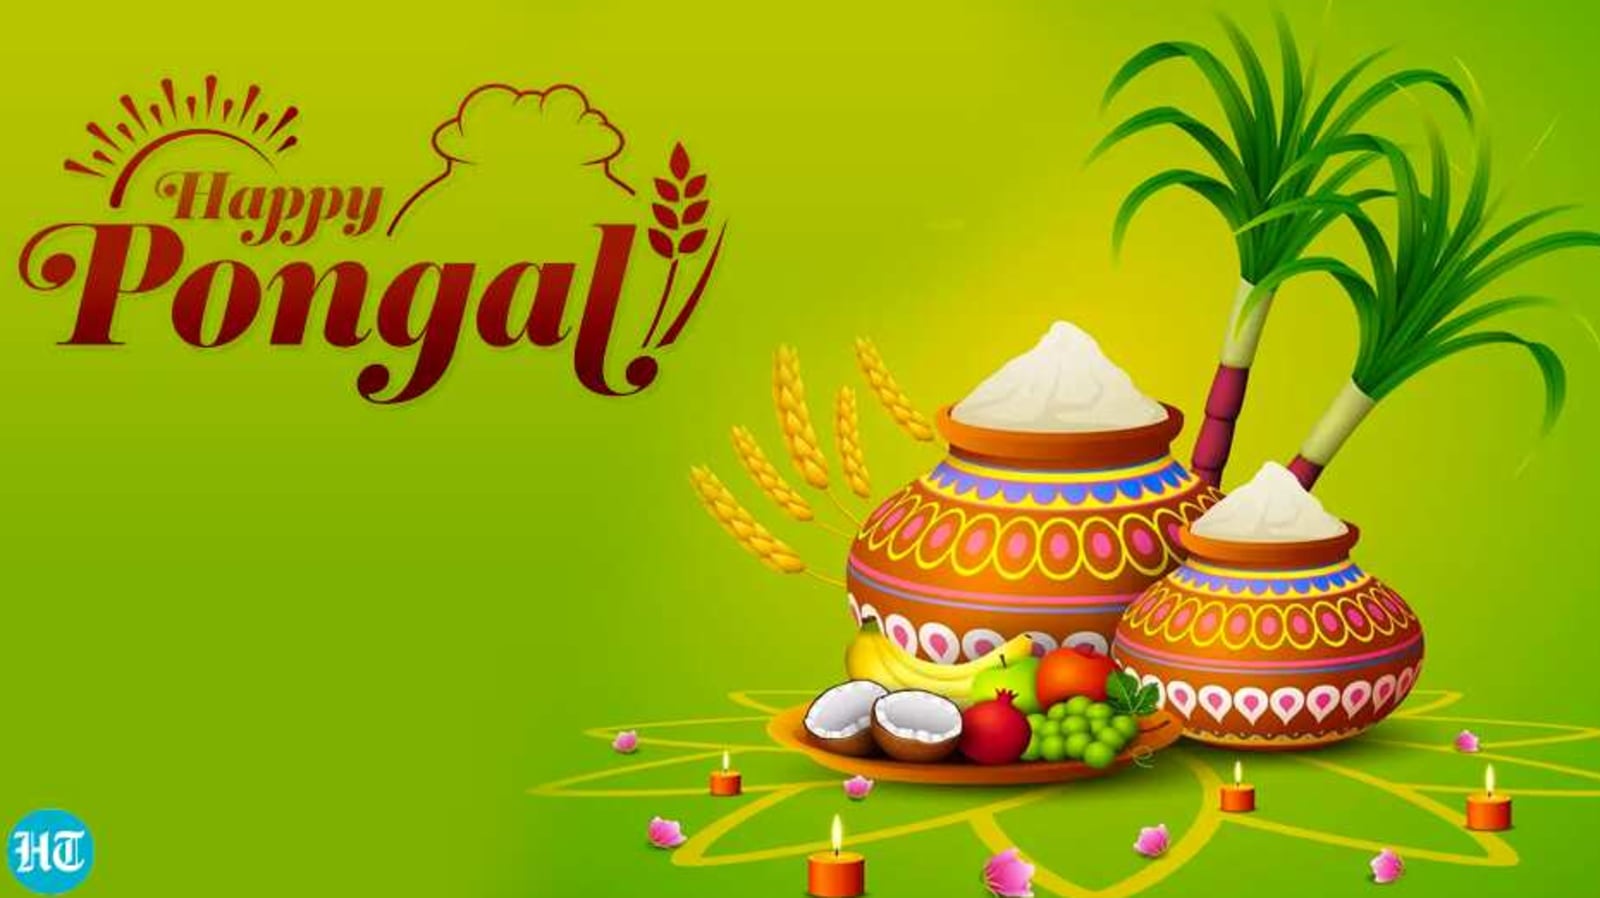 Over 999 Incredible Pongal Images A Spectacular Compilation in Full 4K